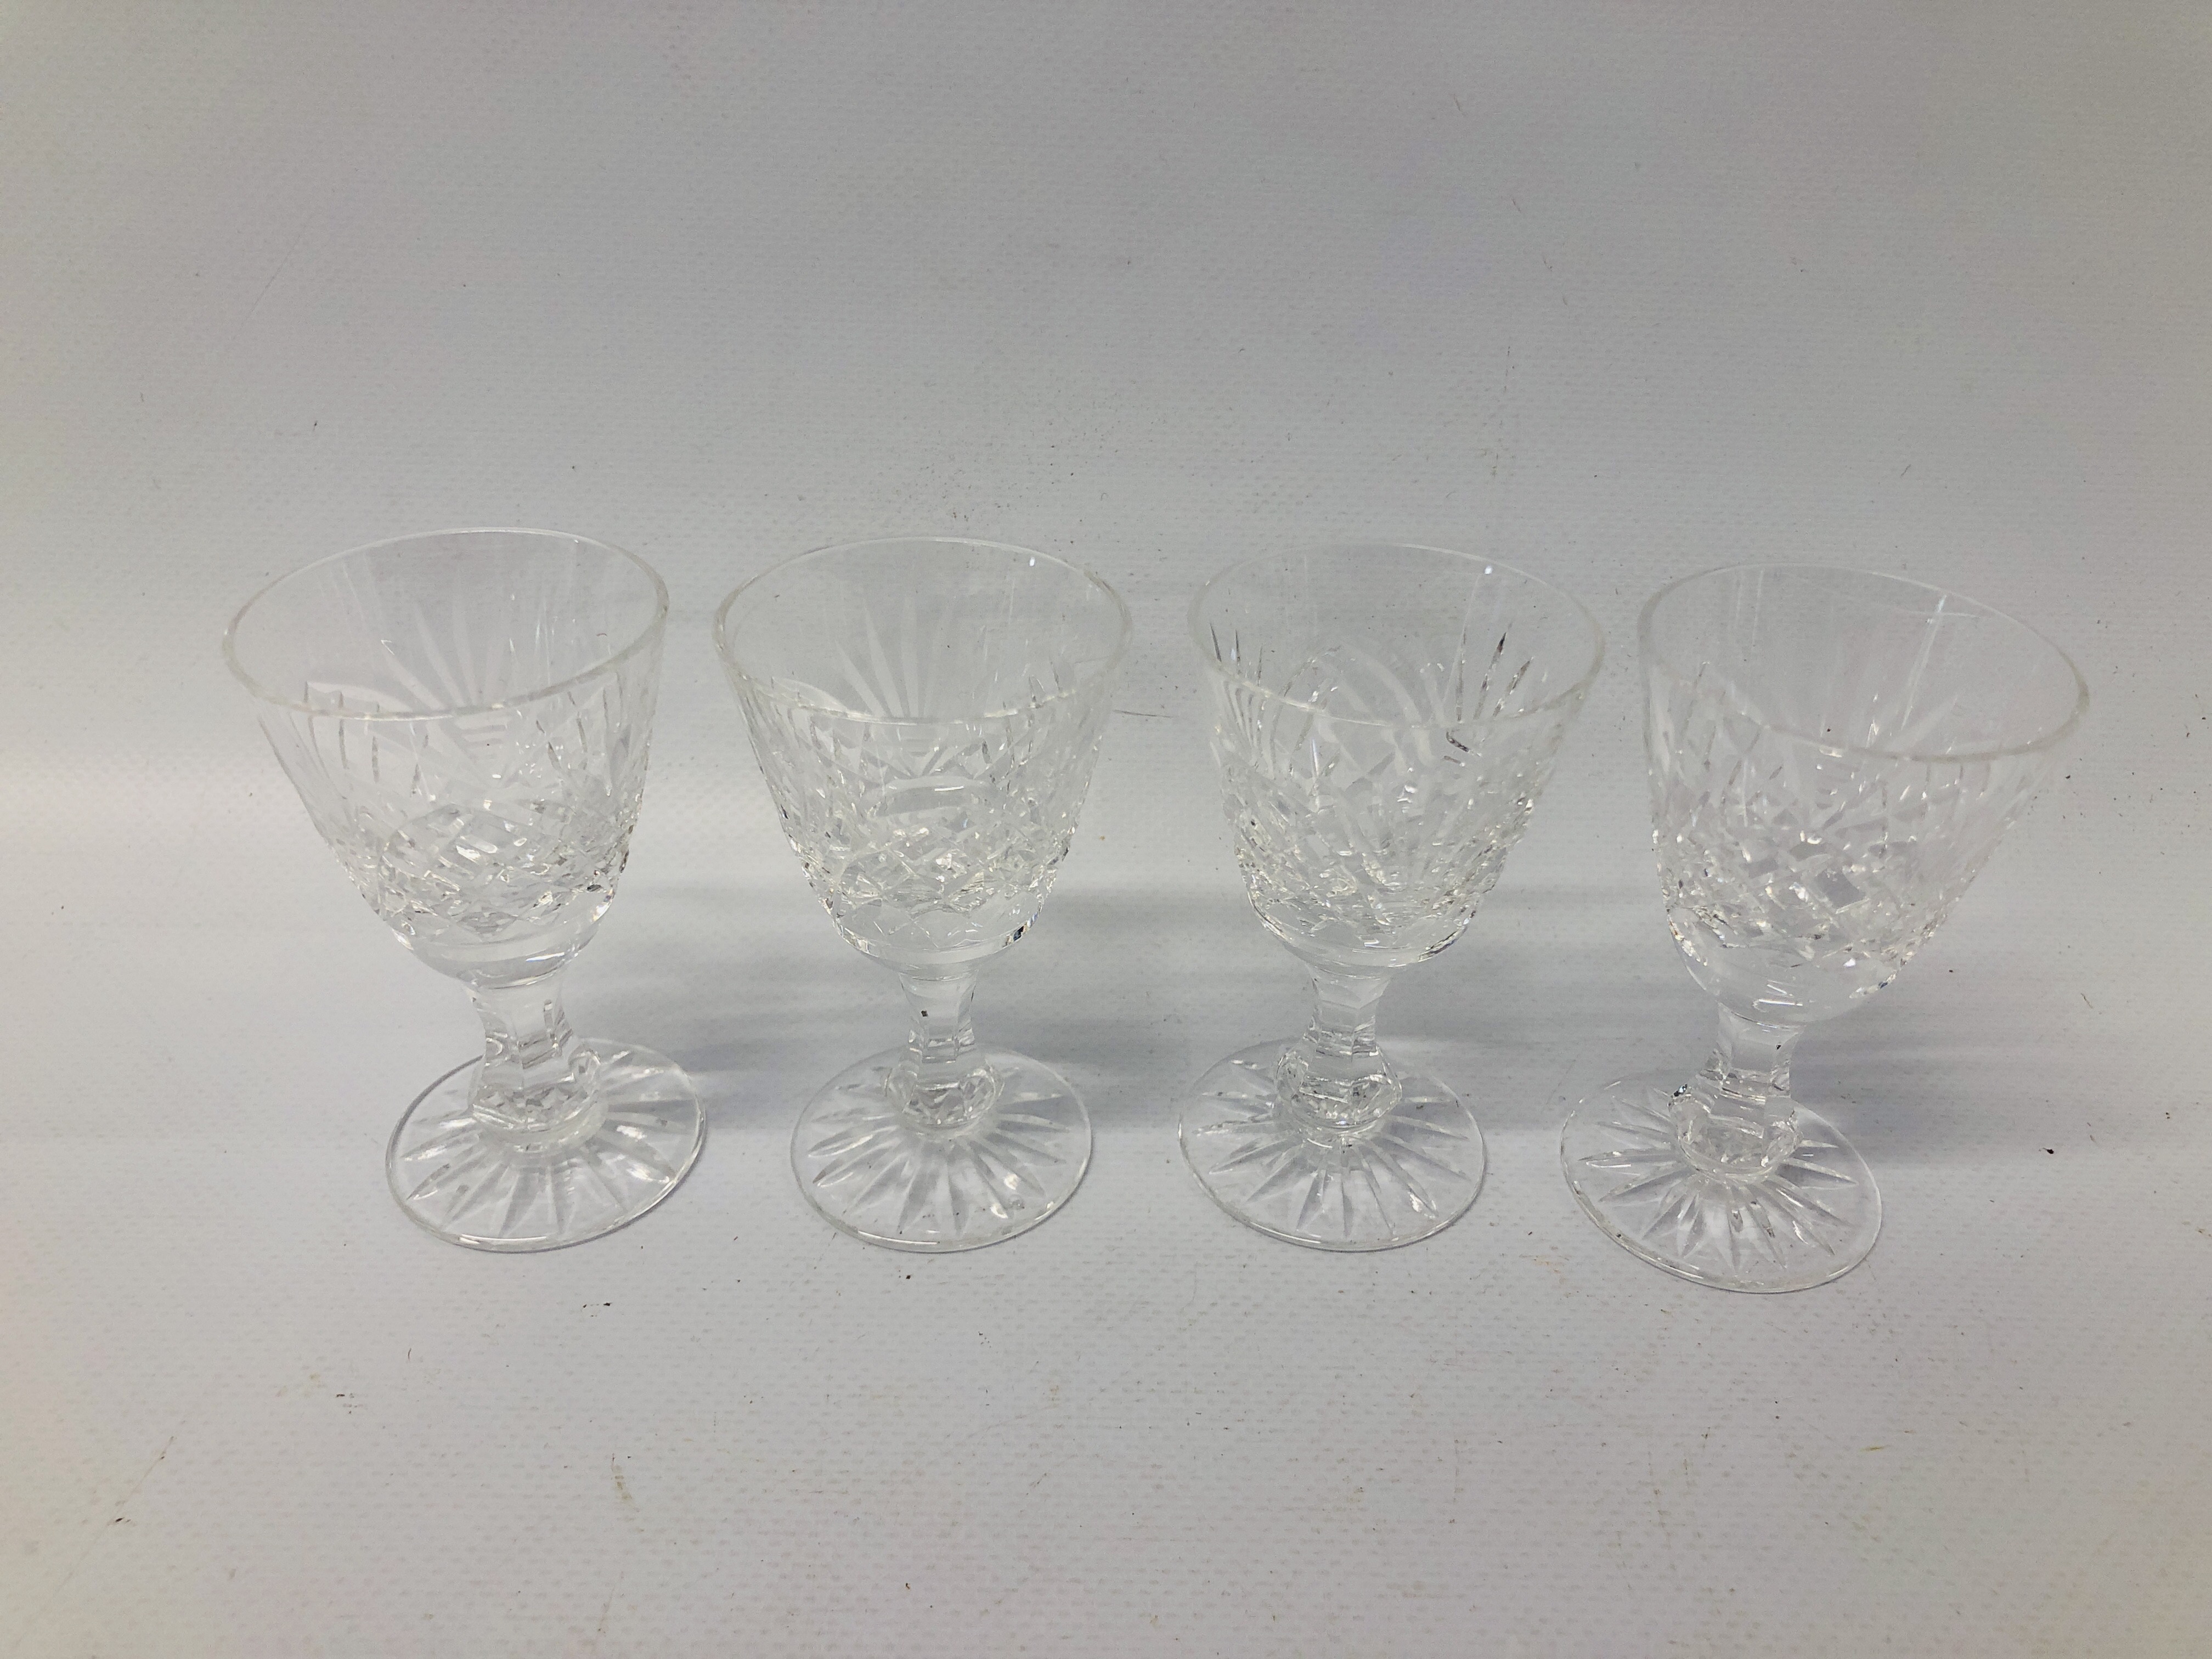 COLLECTION OF GOOD QUALITY CUT GLASS CRYSTAL DRINKING VESSELS ALONG WITH A SET OF 4 HAND PAINTED - Image 11 of 11